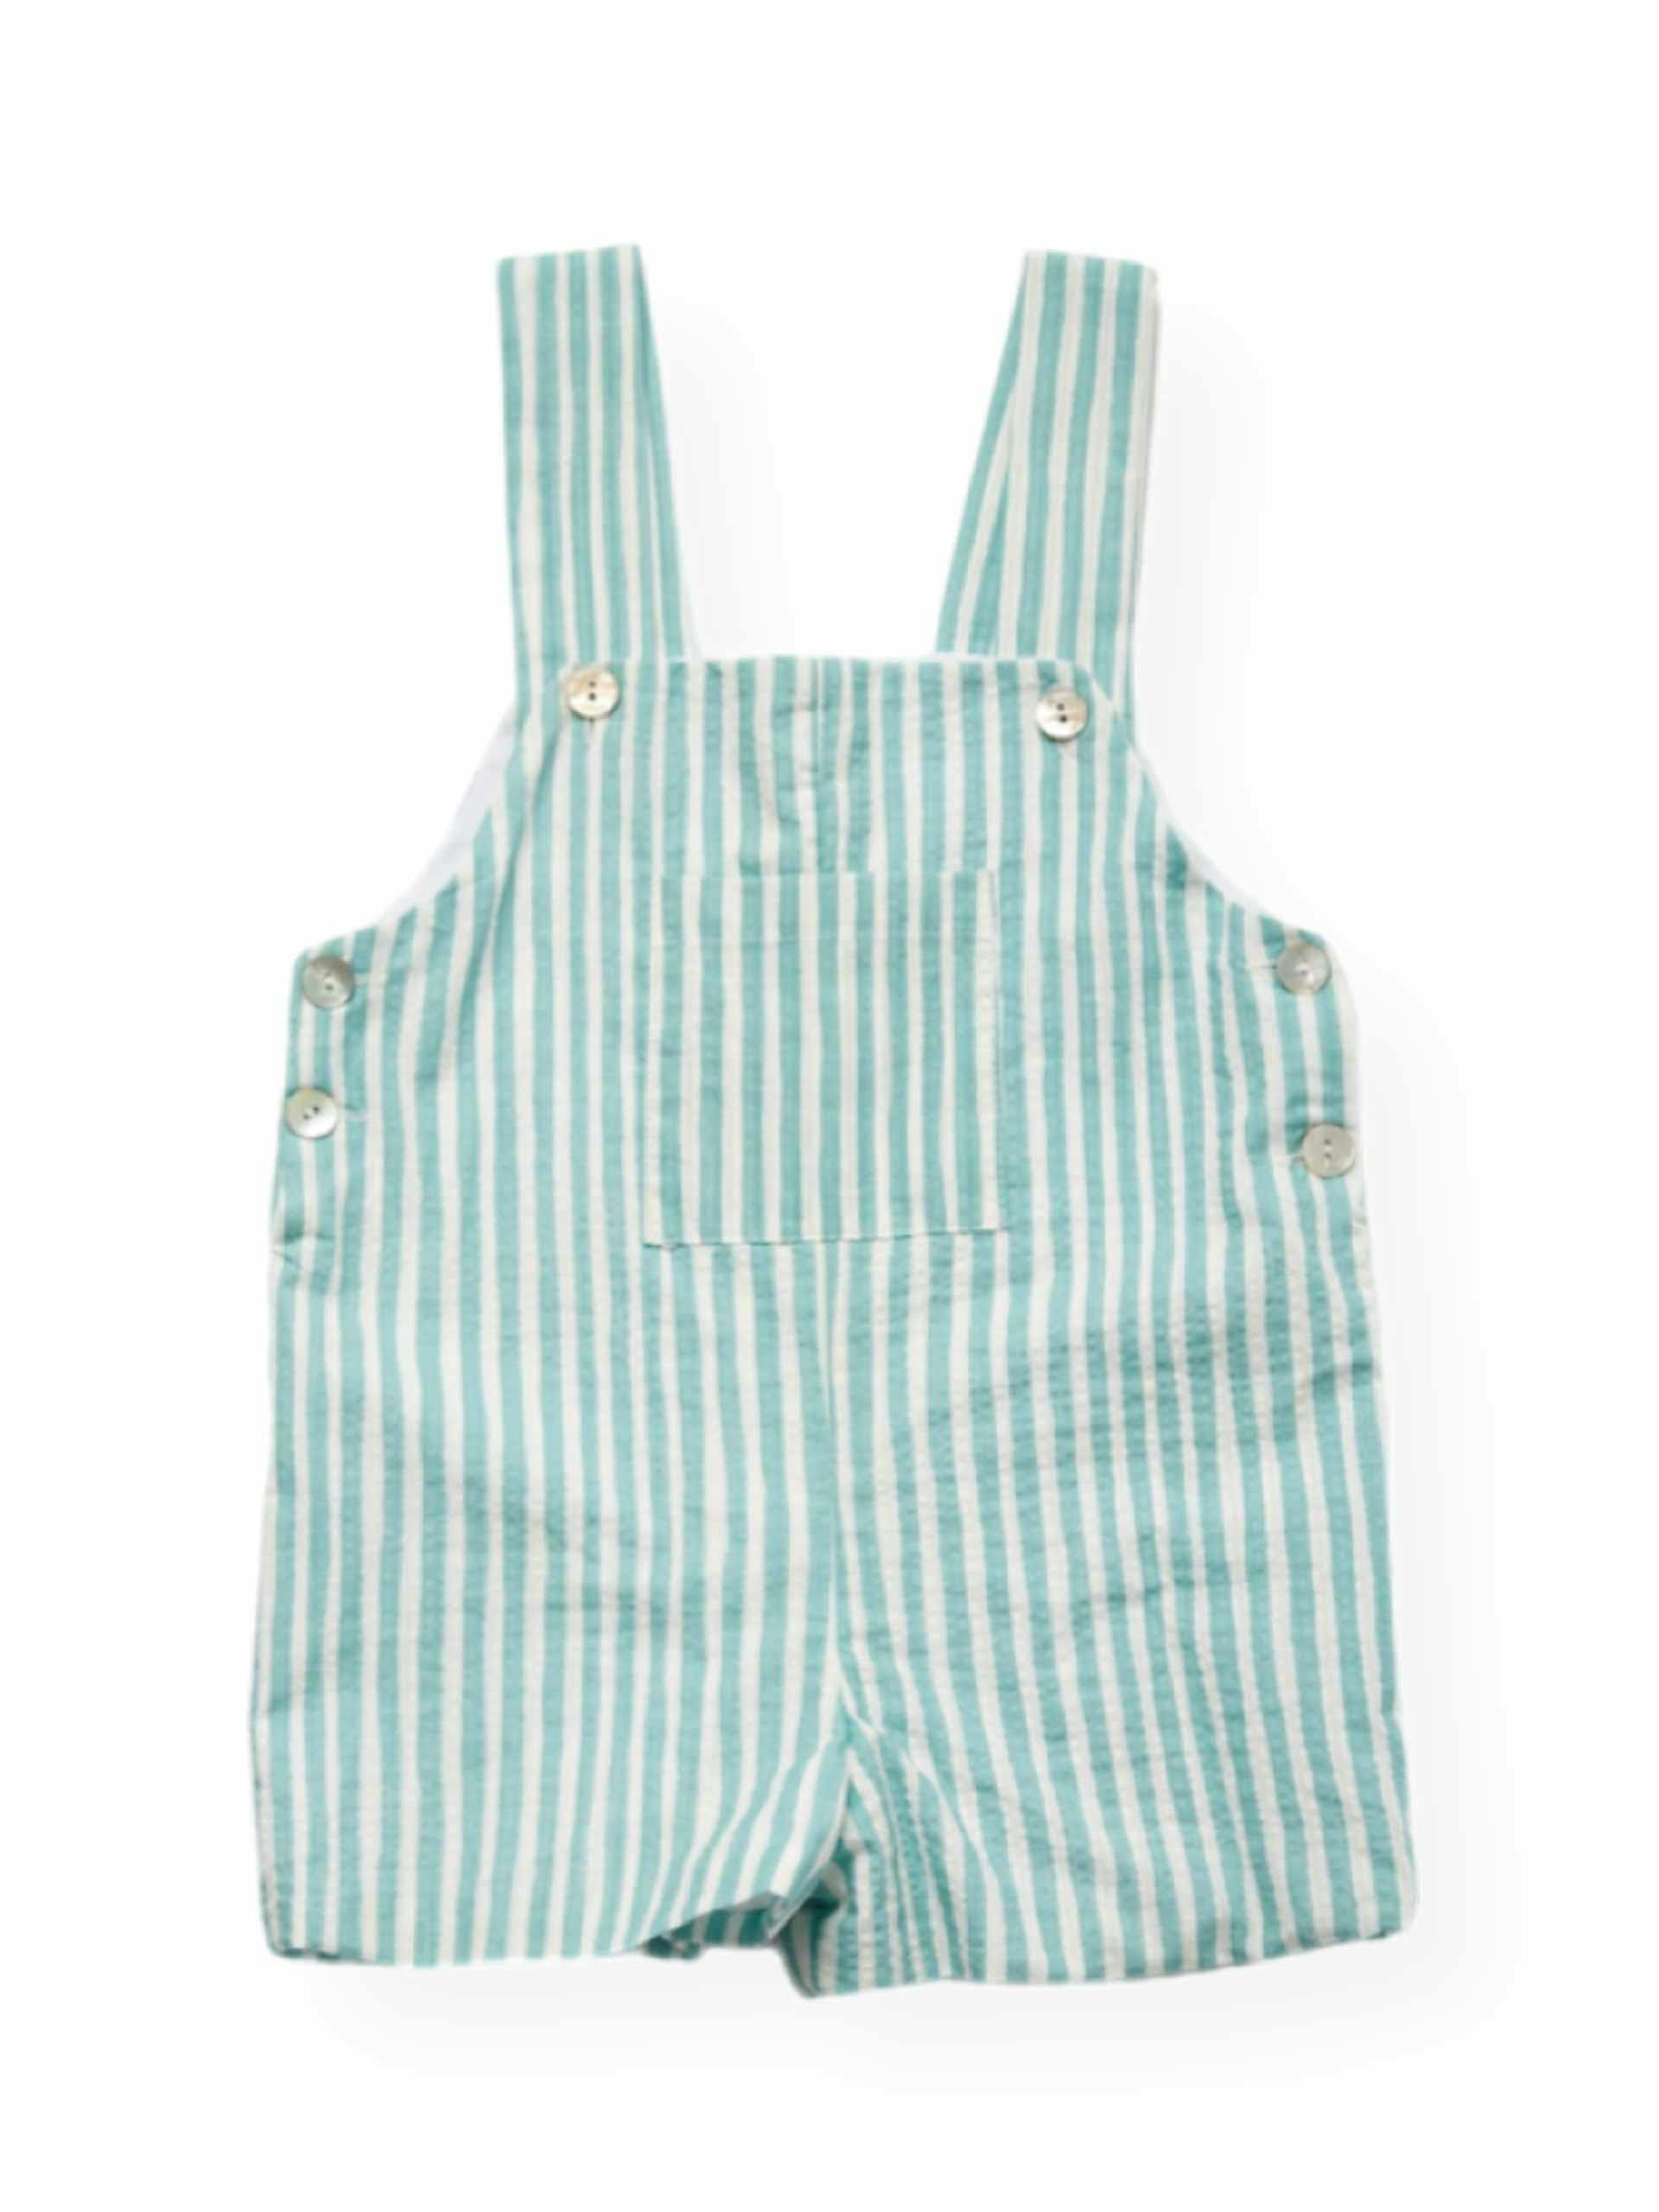 Blue striped summer overalls